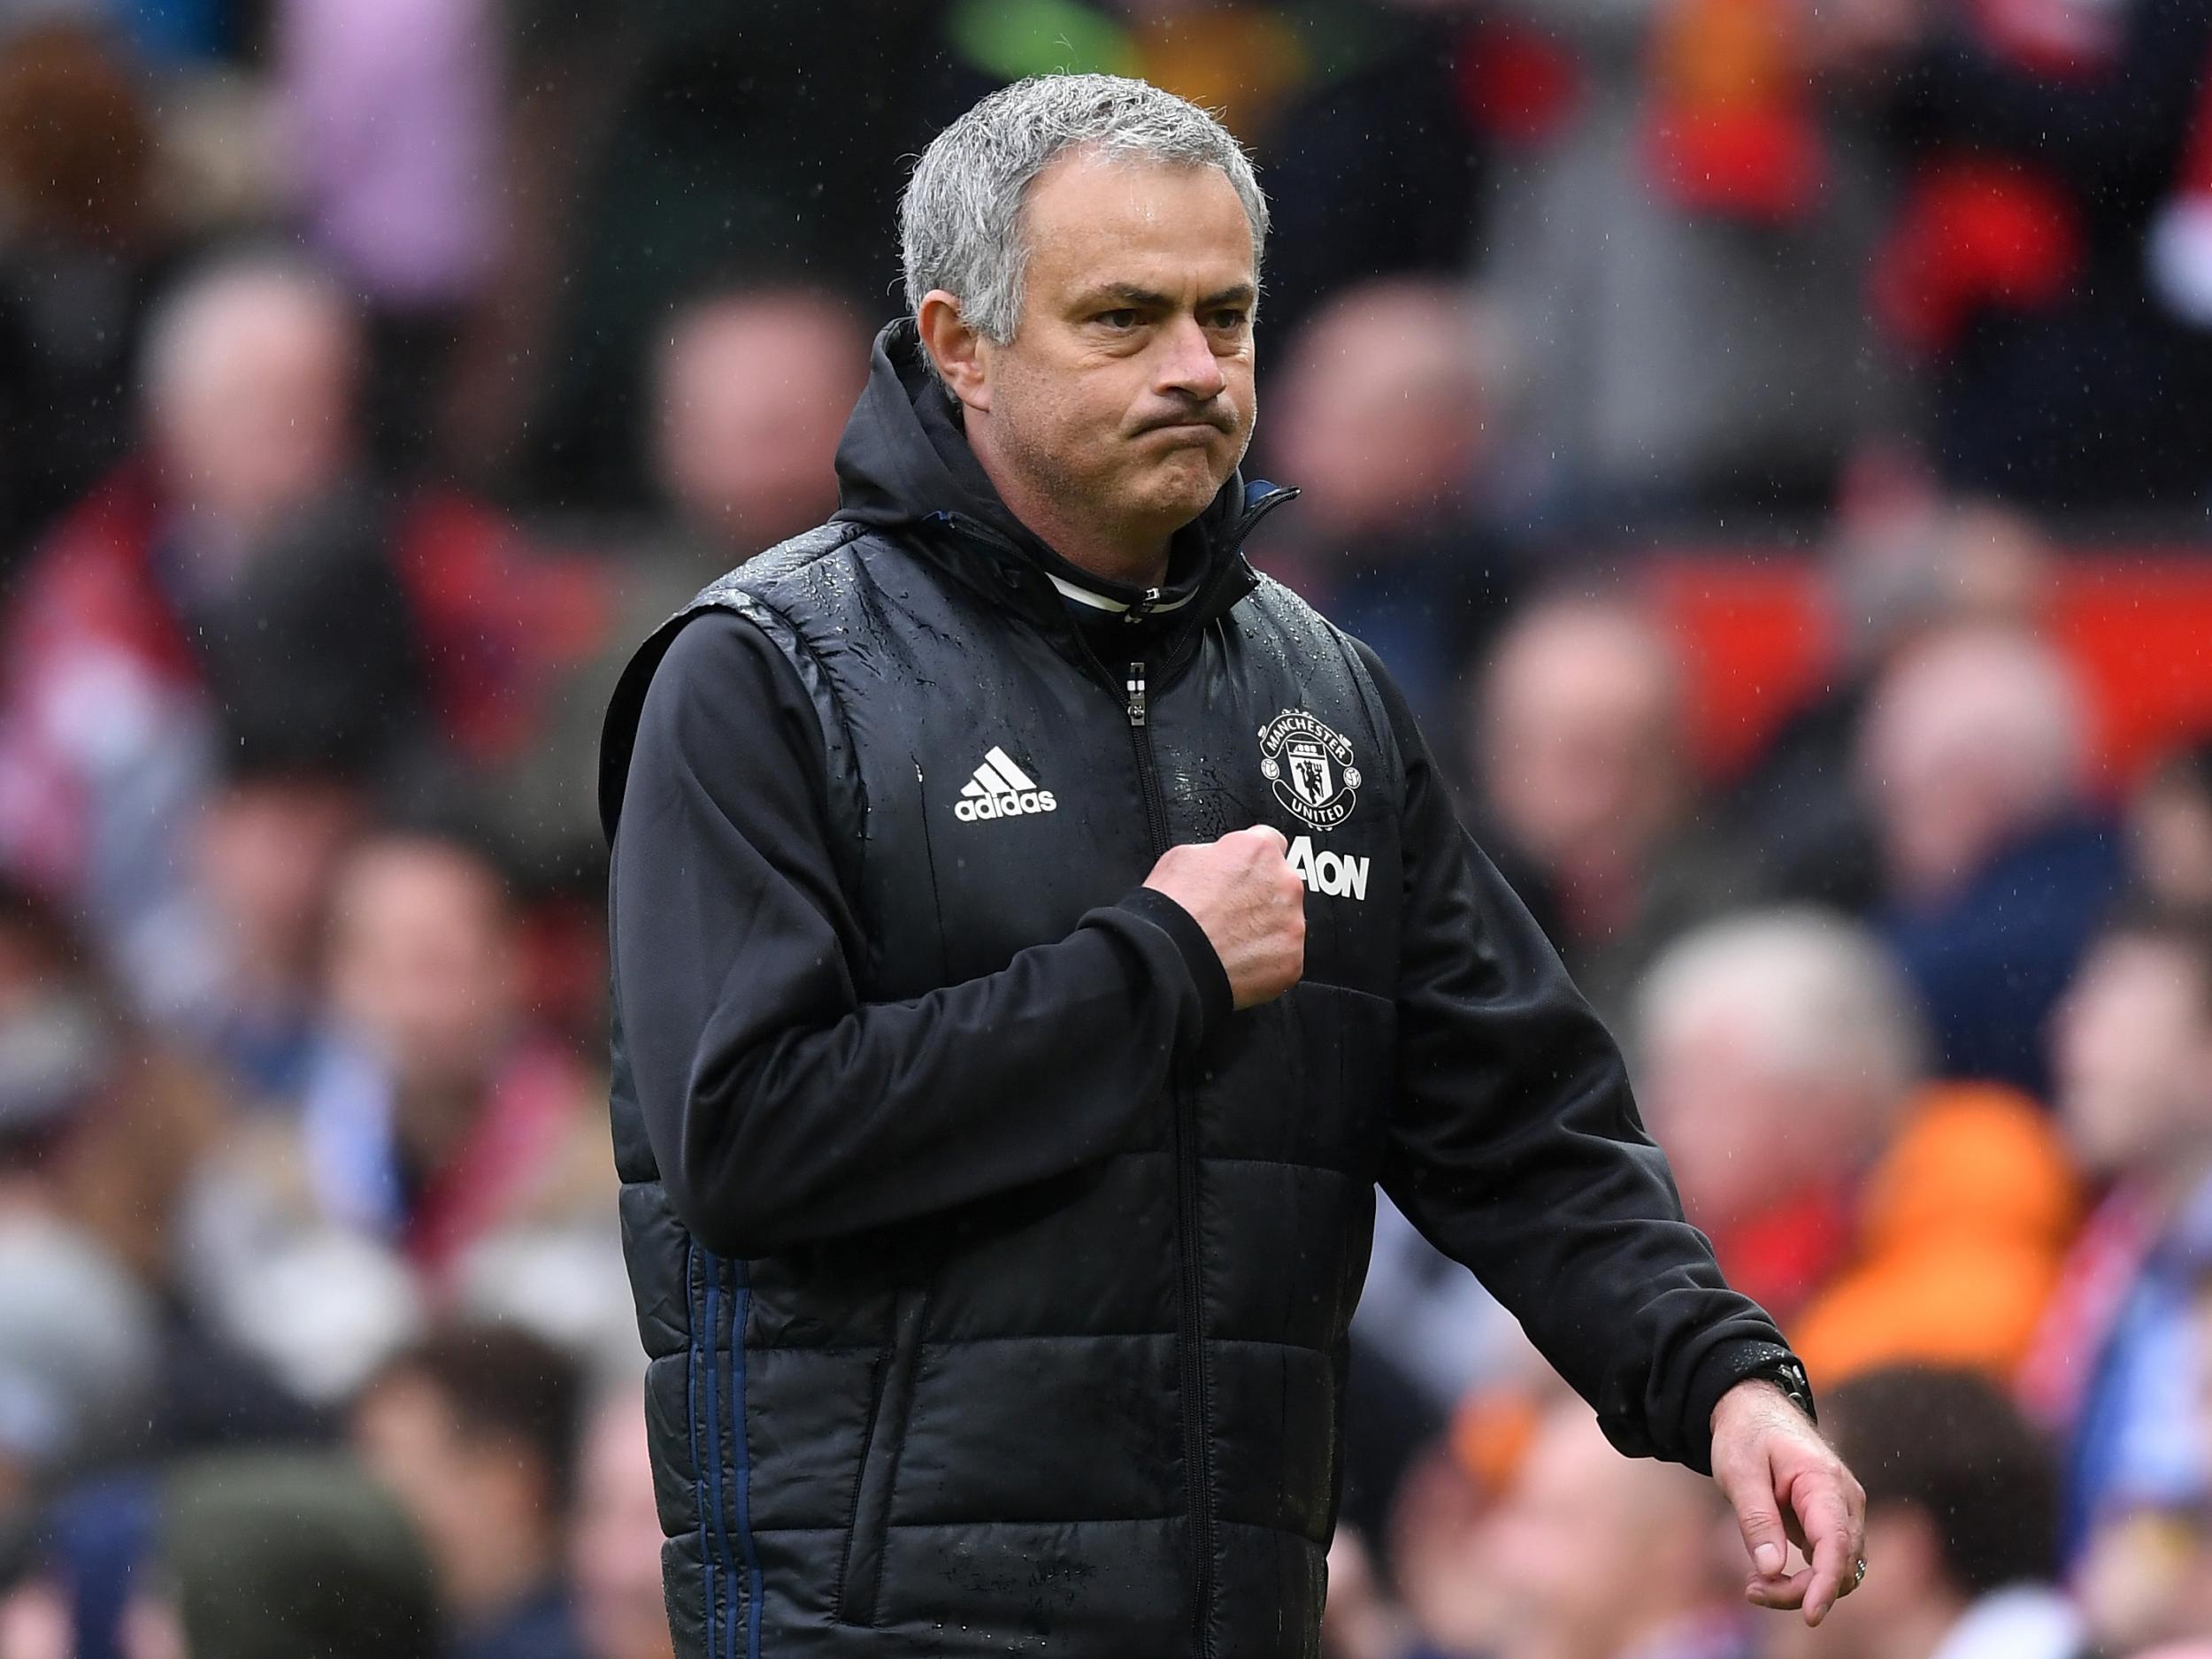 Jose Mourinho's men are chasing a first league title in five years